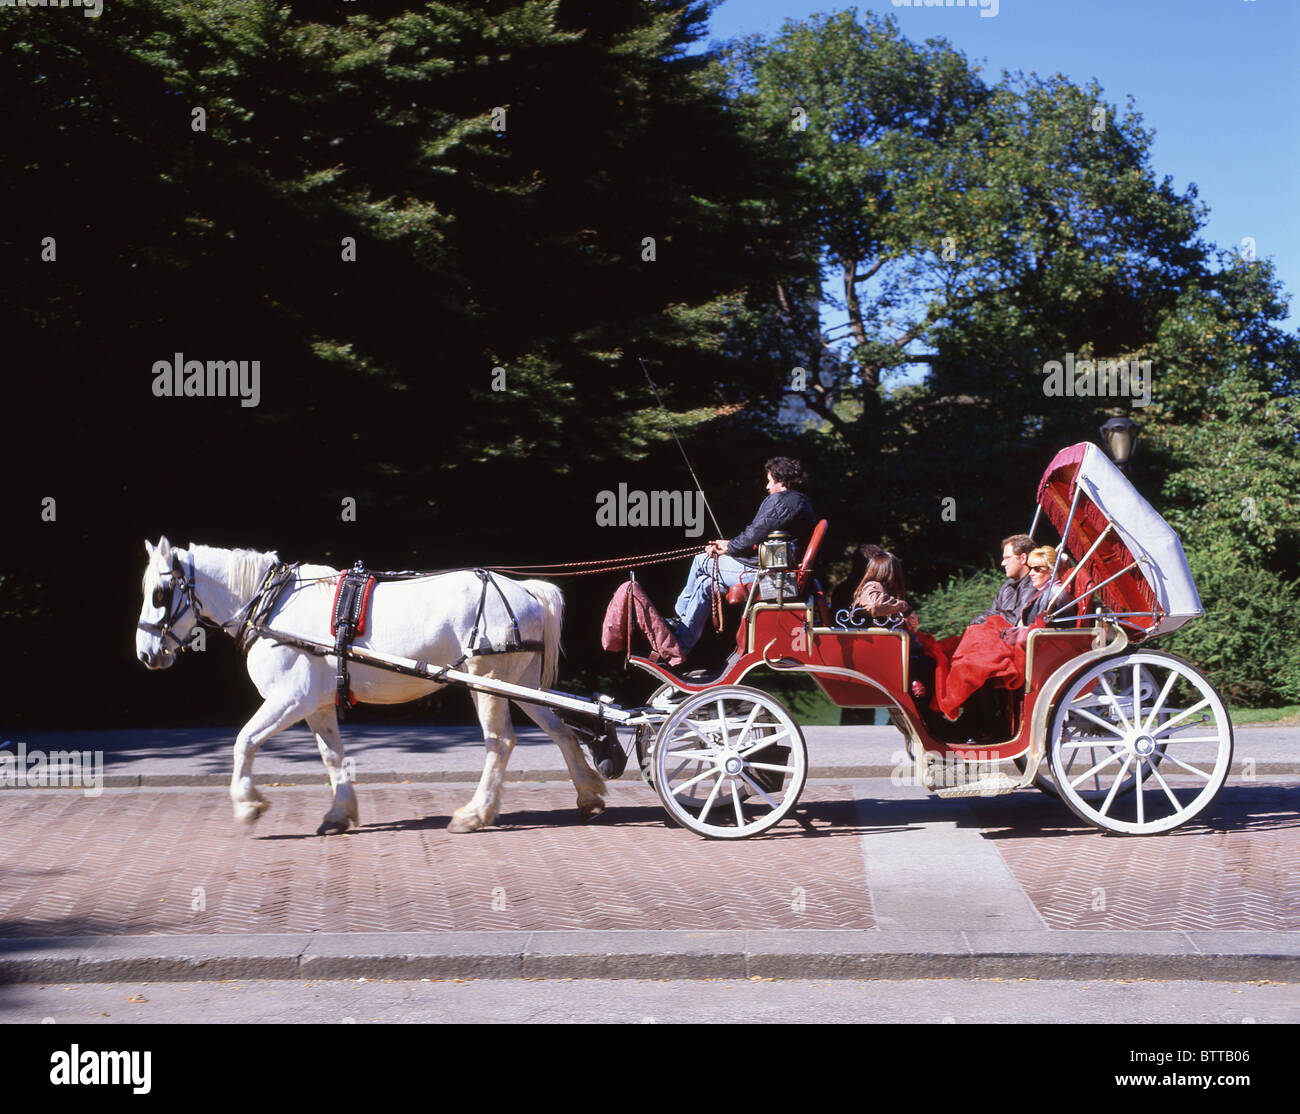 Horse carriage, Central Park, Manhattan, New York, New York State, United States of America Stock Photo